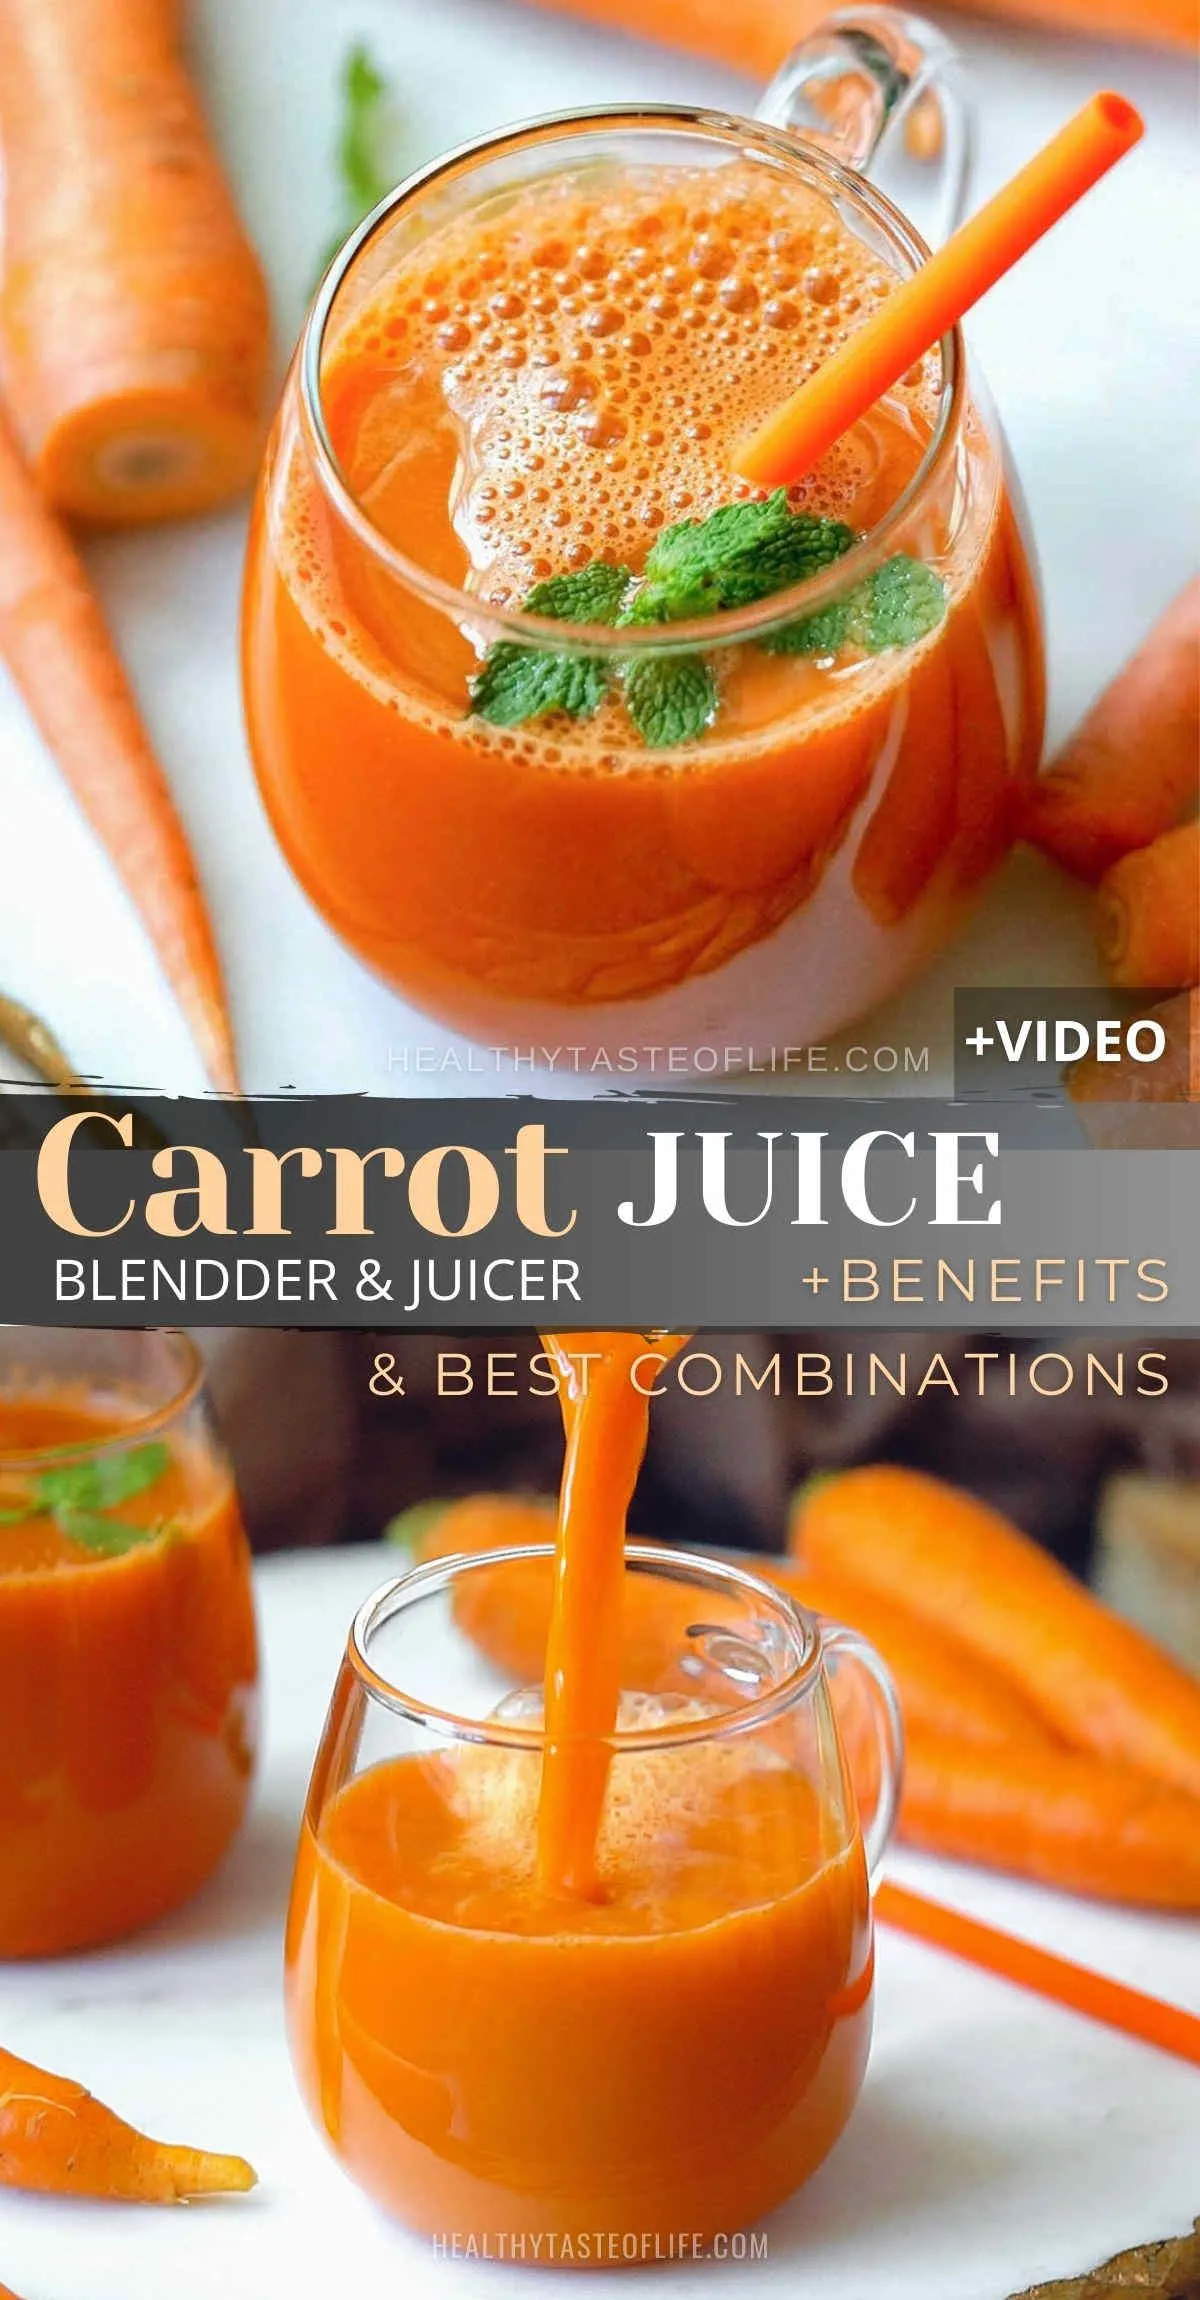 Make this fresh carrot juice recipe in a blender or if you have a juicer, pass the ingredients through your juicer and enjoy all the carrot juice benefits whenever you need an immune boost. Make a plain simple carrot juice or blend other vegetables and fruits for nutrient diversifications or taste enhancement (great for kids too). Learn the long term  benefits of a fresh homemade carrot juice. #carrotjuice #carrotjuicerecipe #juicing #blender #juicer #kids #video